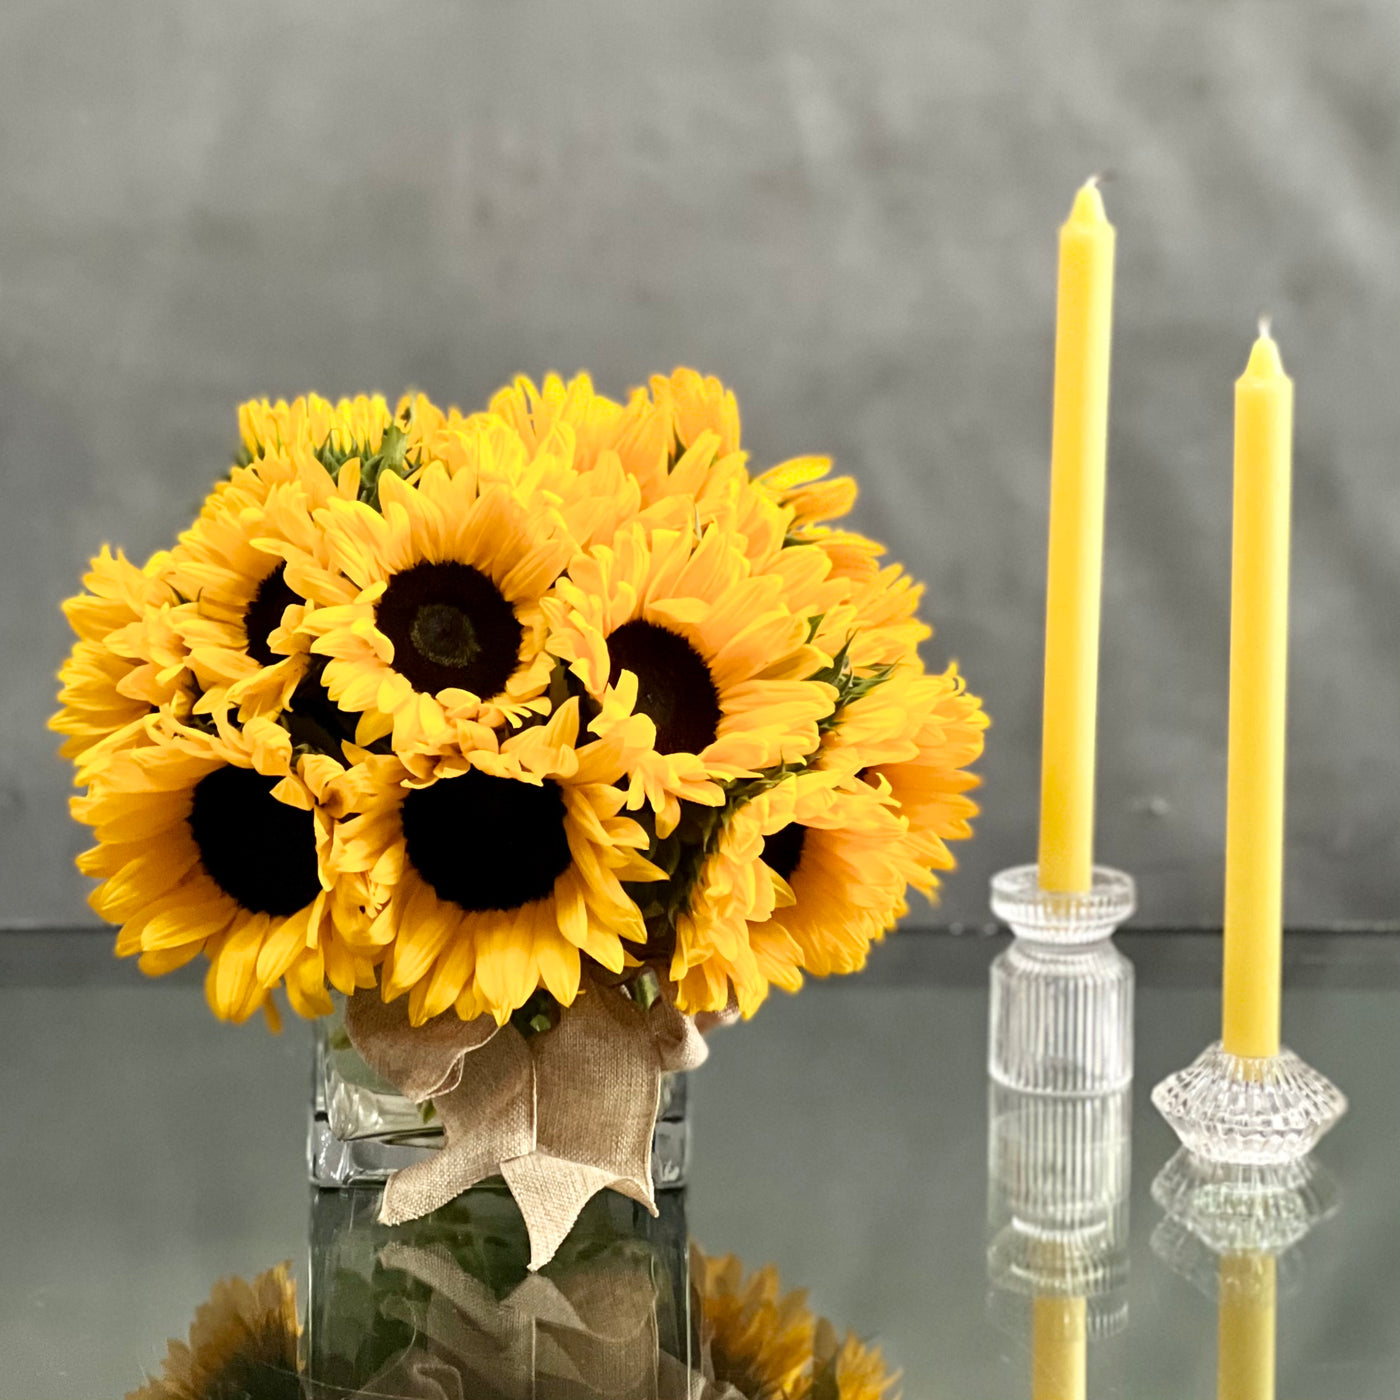 This sunny sunflowers is set in a 5X5 glass vase and tied with a beautiful bow by  Beverly Hills Florist is sure to put a smile on anyone's face on occasions like get well, thank you, just because.